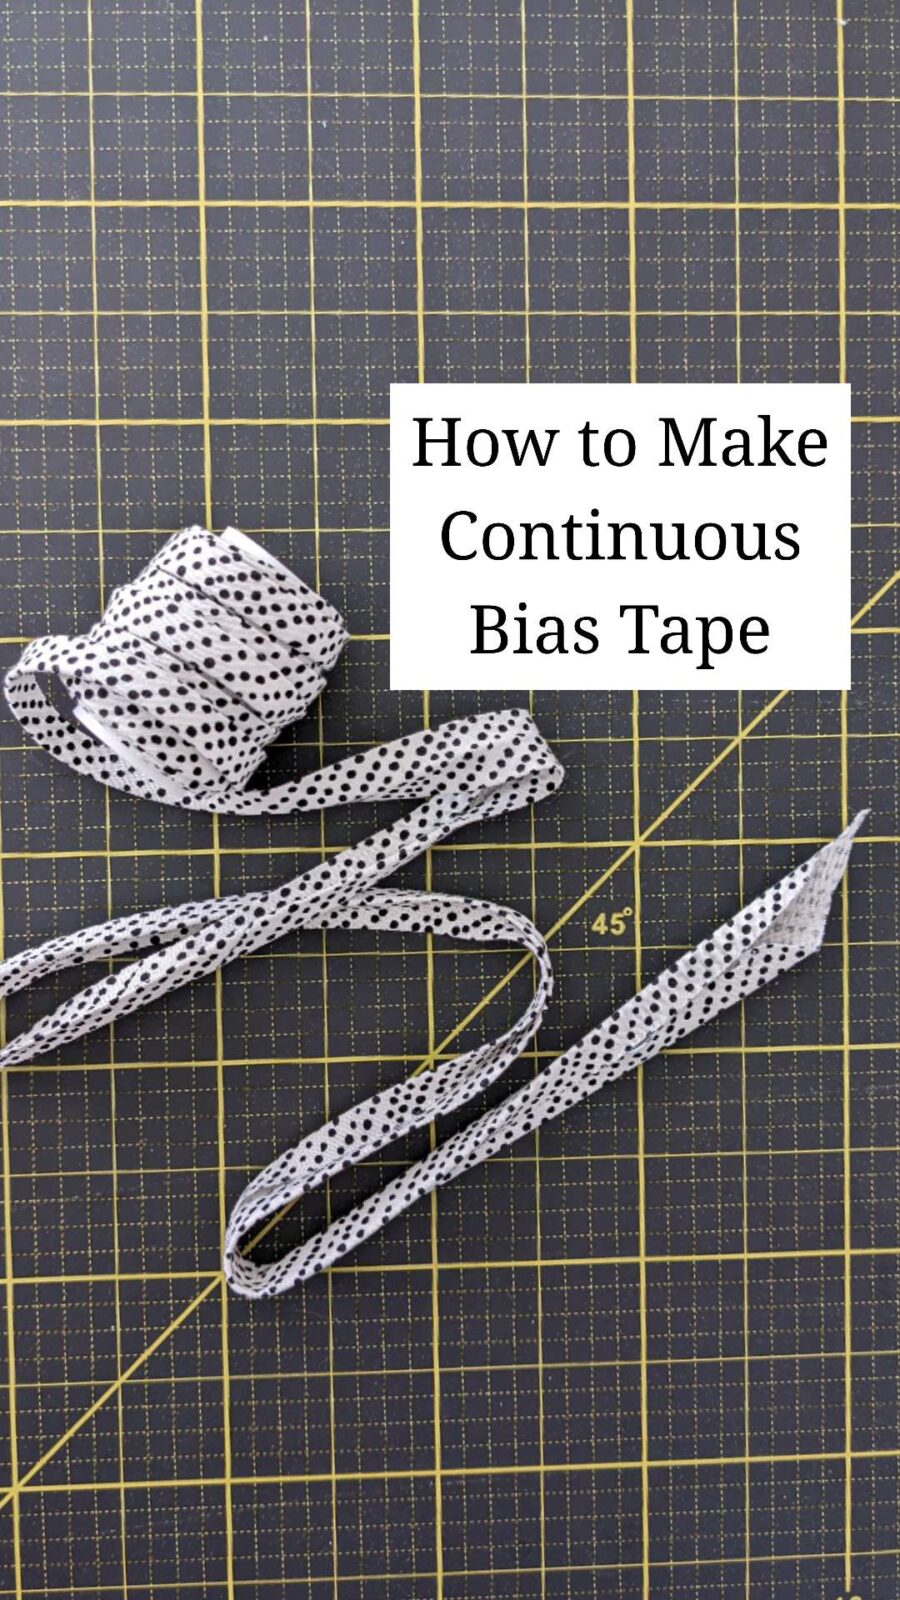 How to Make Continuous Bias Tape Binding!